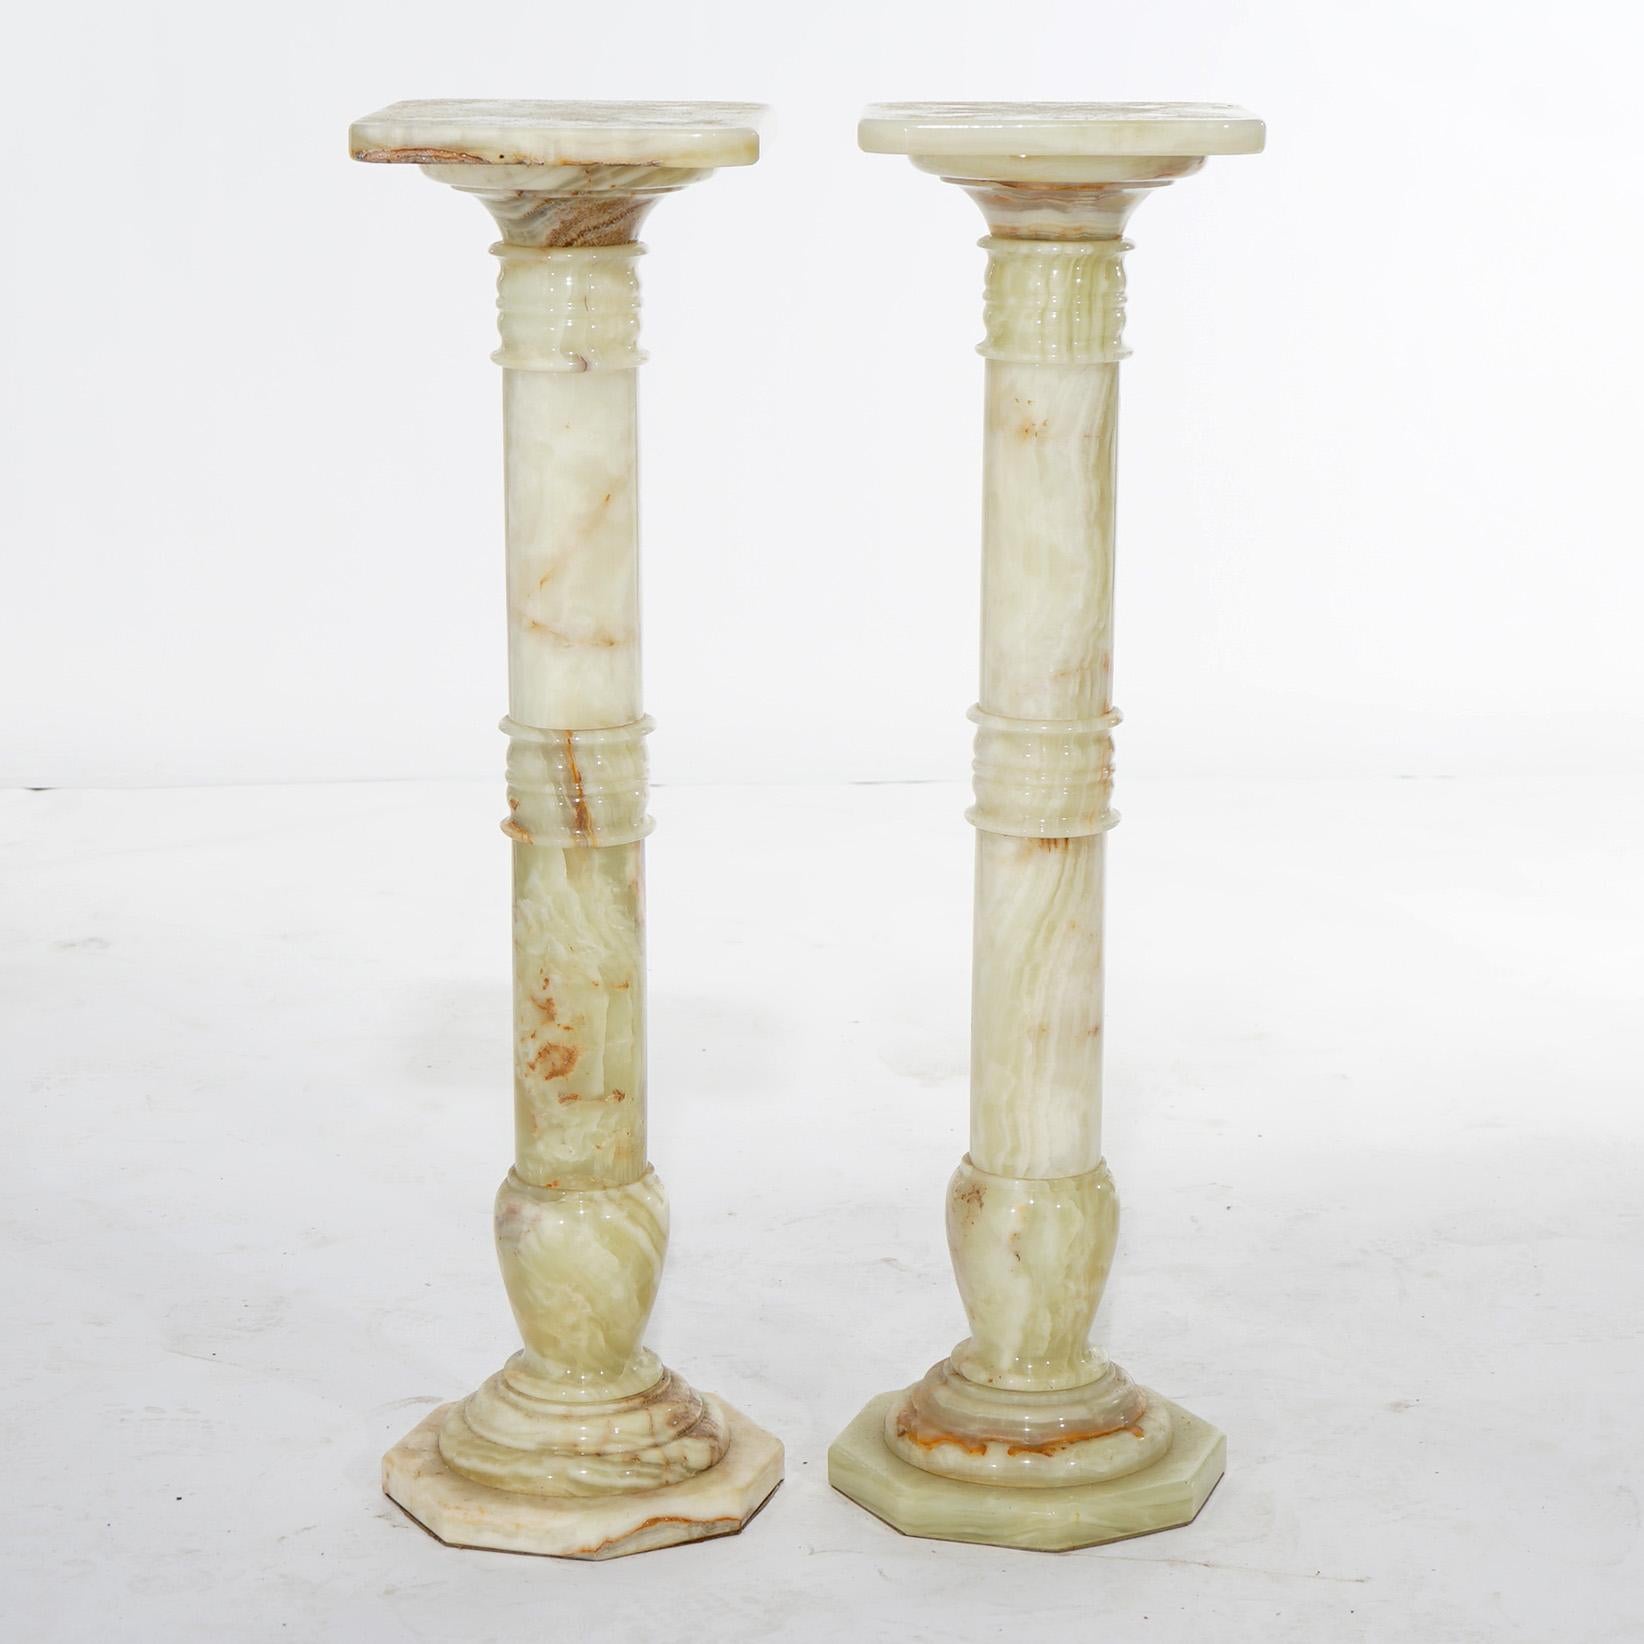 A pair of antique Classical pedestals offer onyx construction in Grecian form with square display platforms over banded bases with octagonal feet, 20th century

Measure - 38